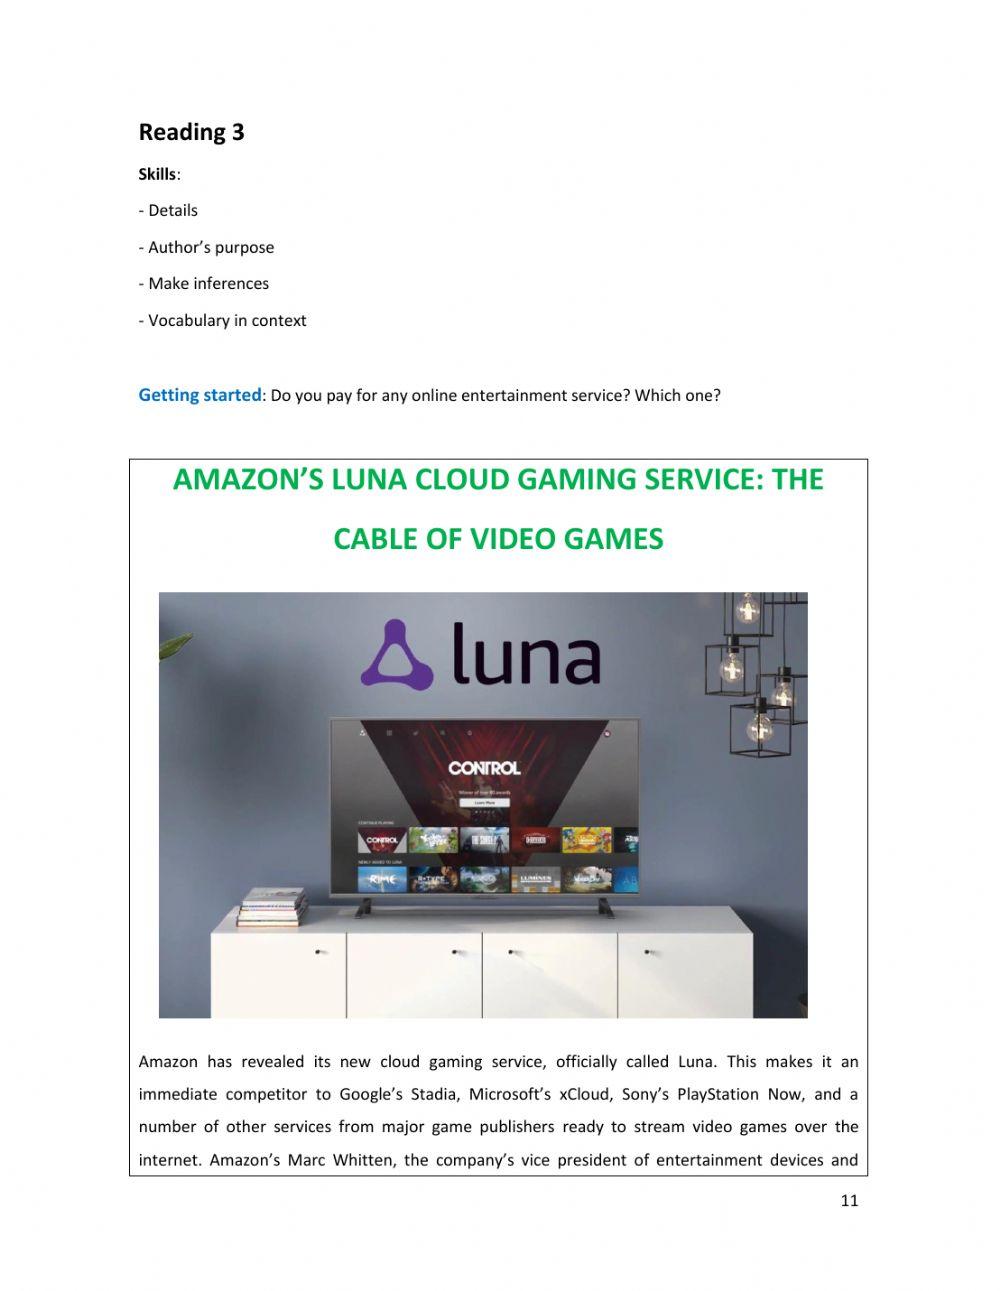 LAMAZON’S LUNA CLOUD GAMING SERVICE: THE CABLE OF VIDEO GAMES